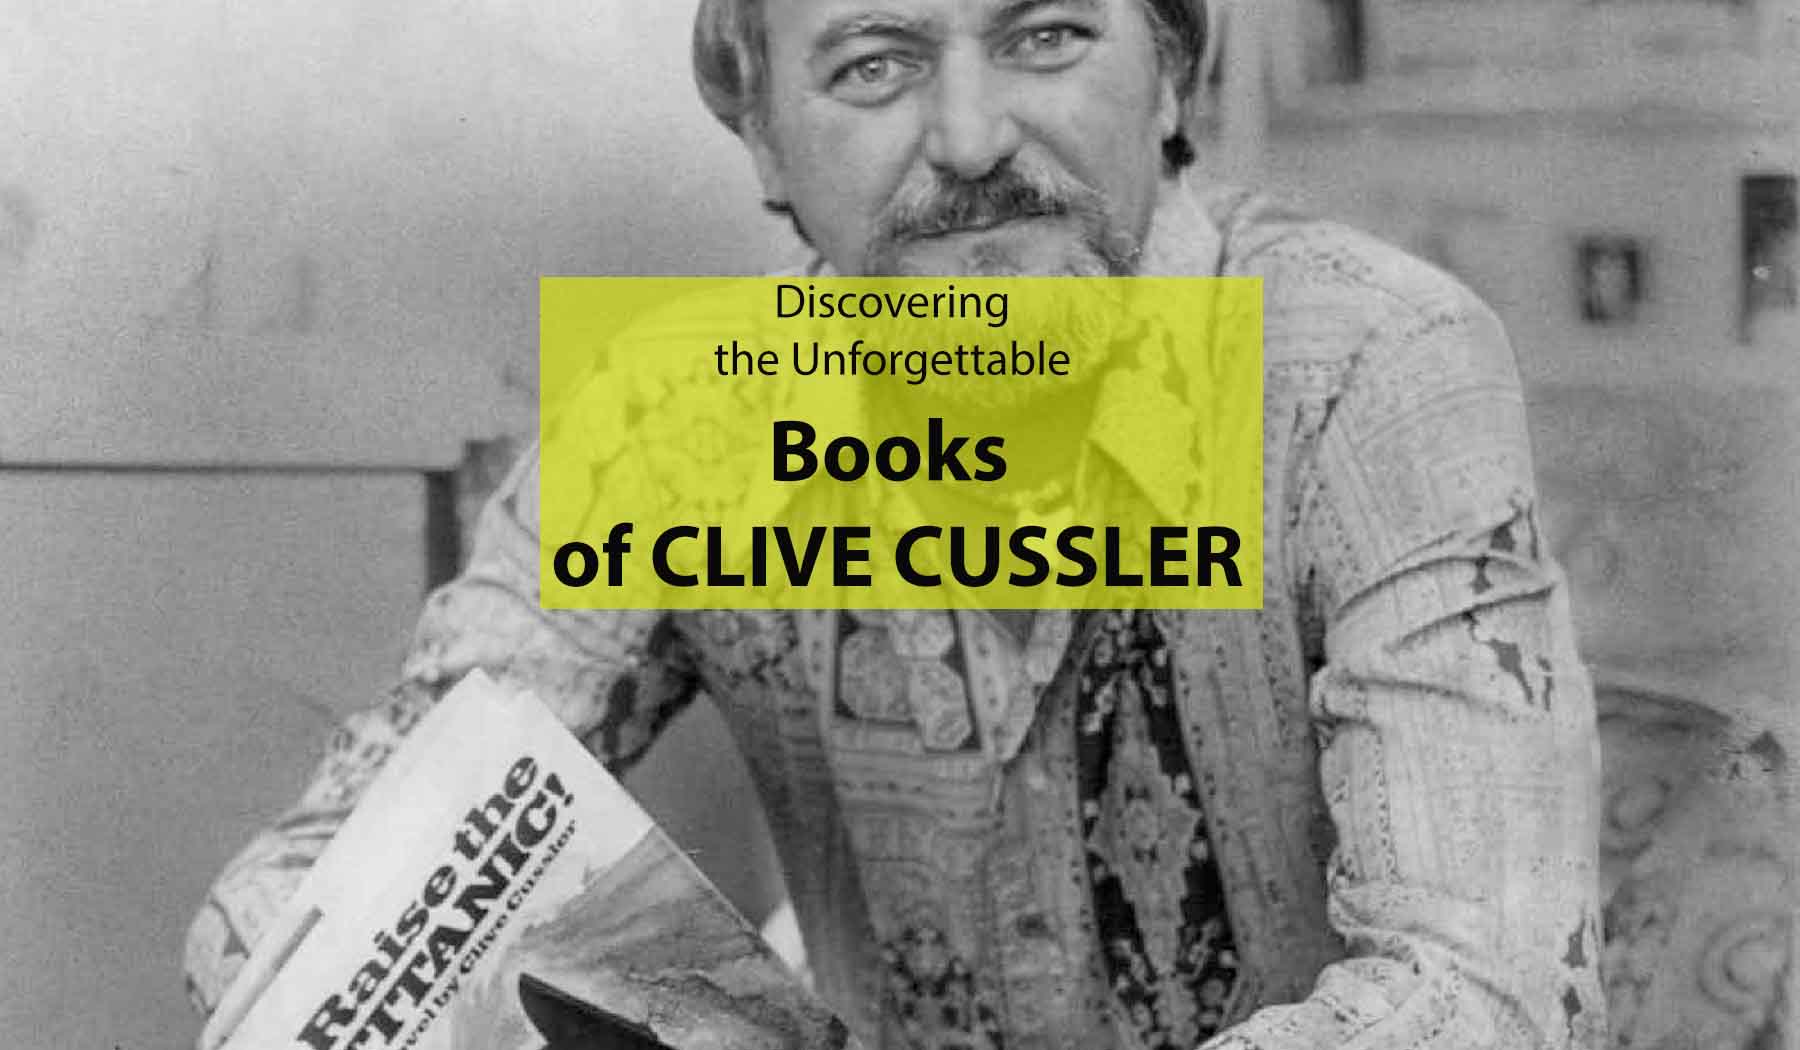 Discovering the Unforgettable Books of Clive Cussler